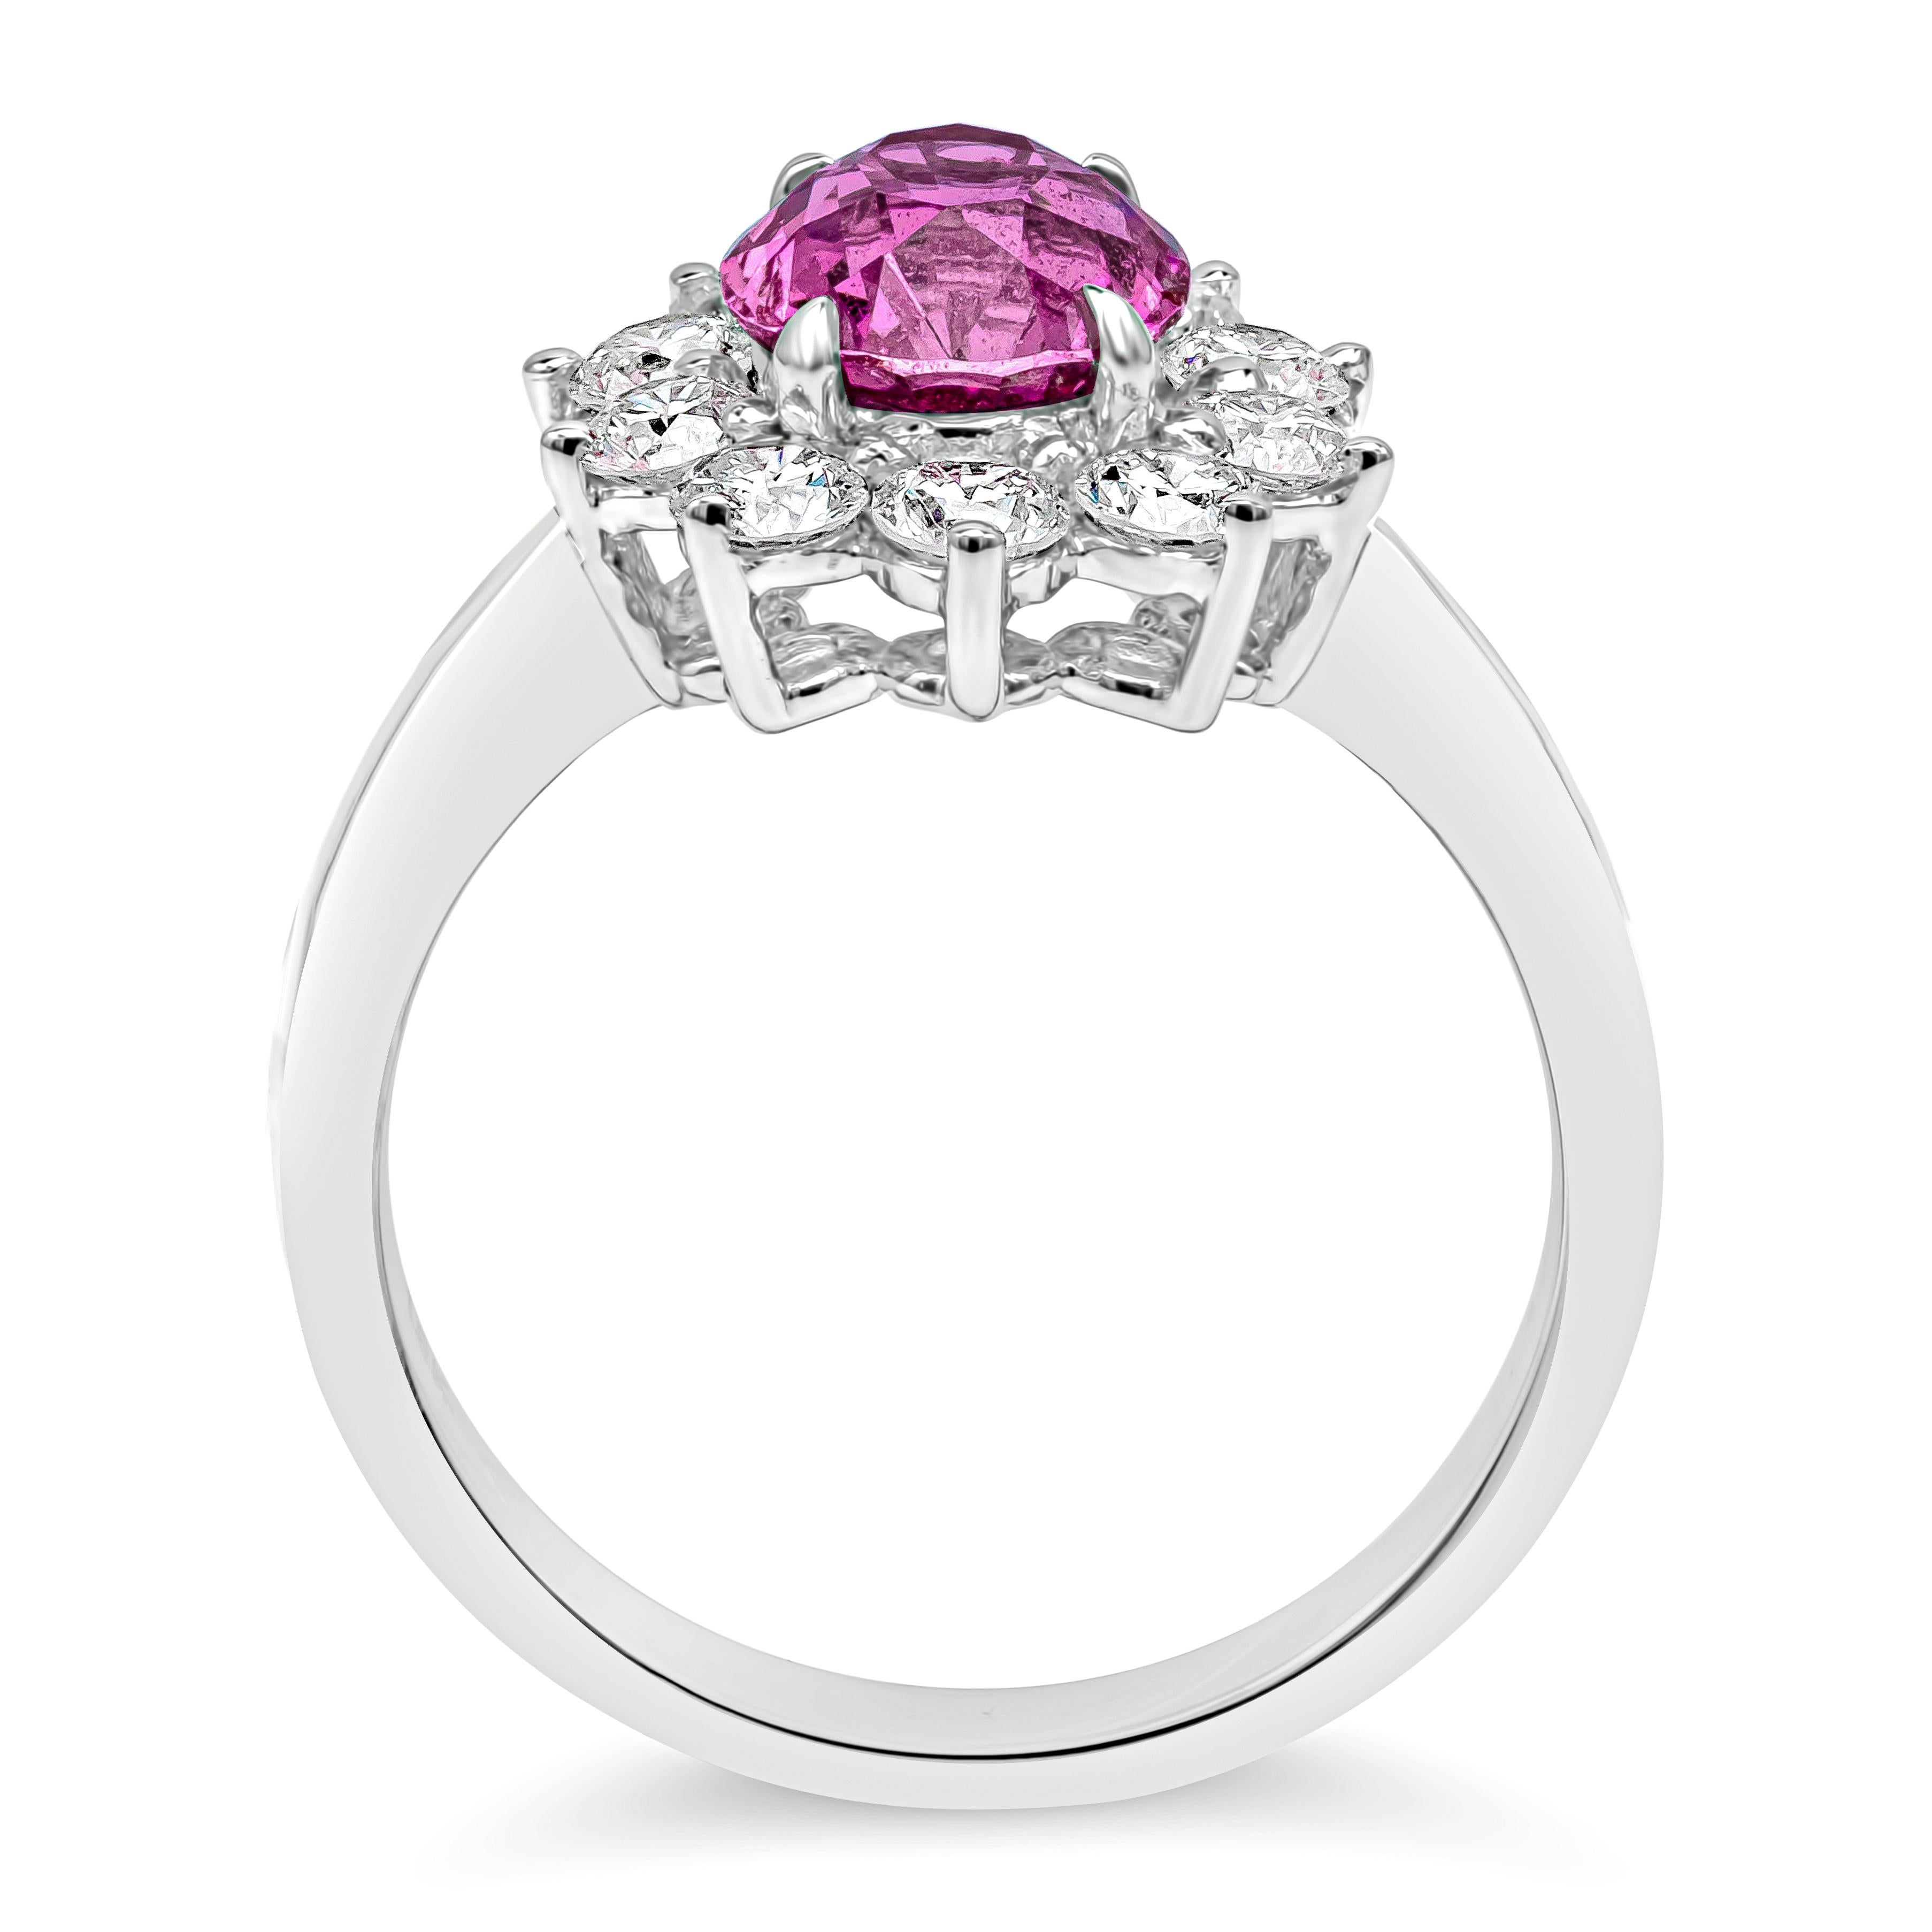 Oval Cut Roman Malakov 1.89 Carat Oval Pink Sapphire with Diamonds Halo Engagement Ring For Sale